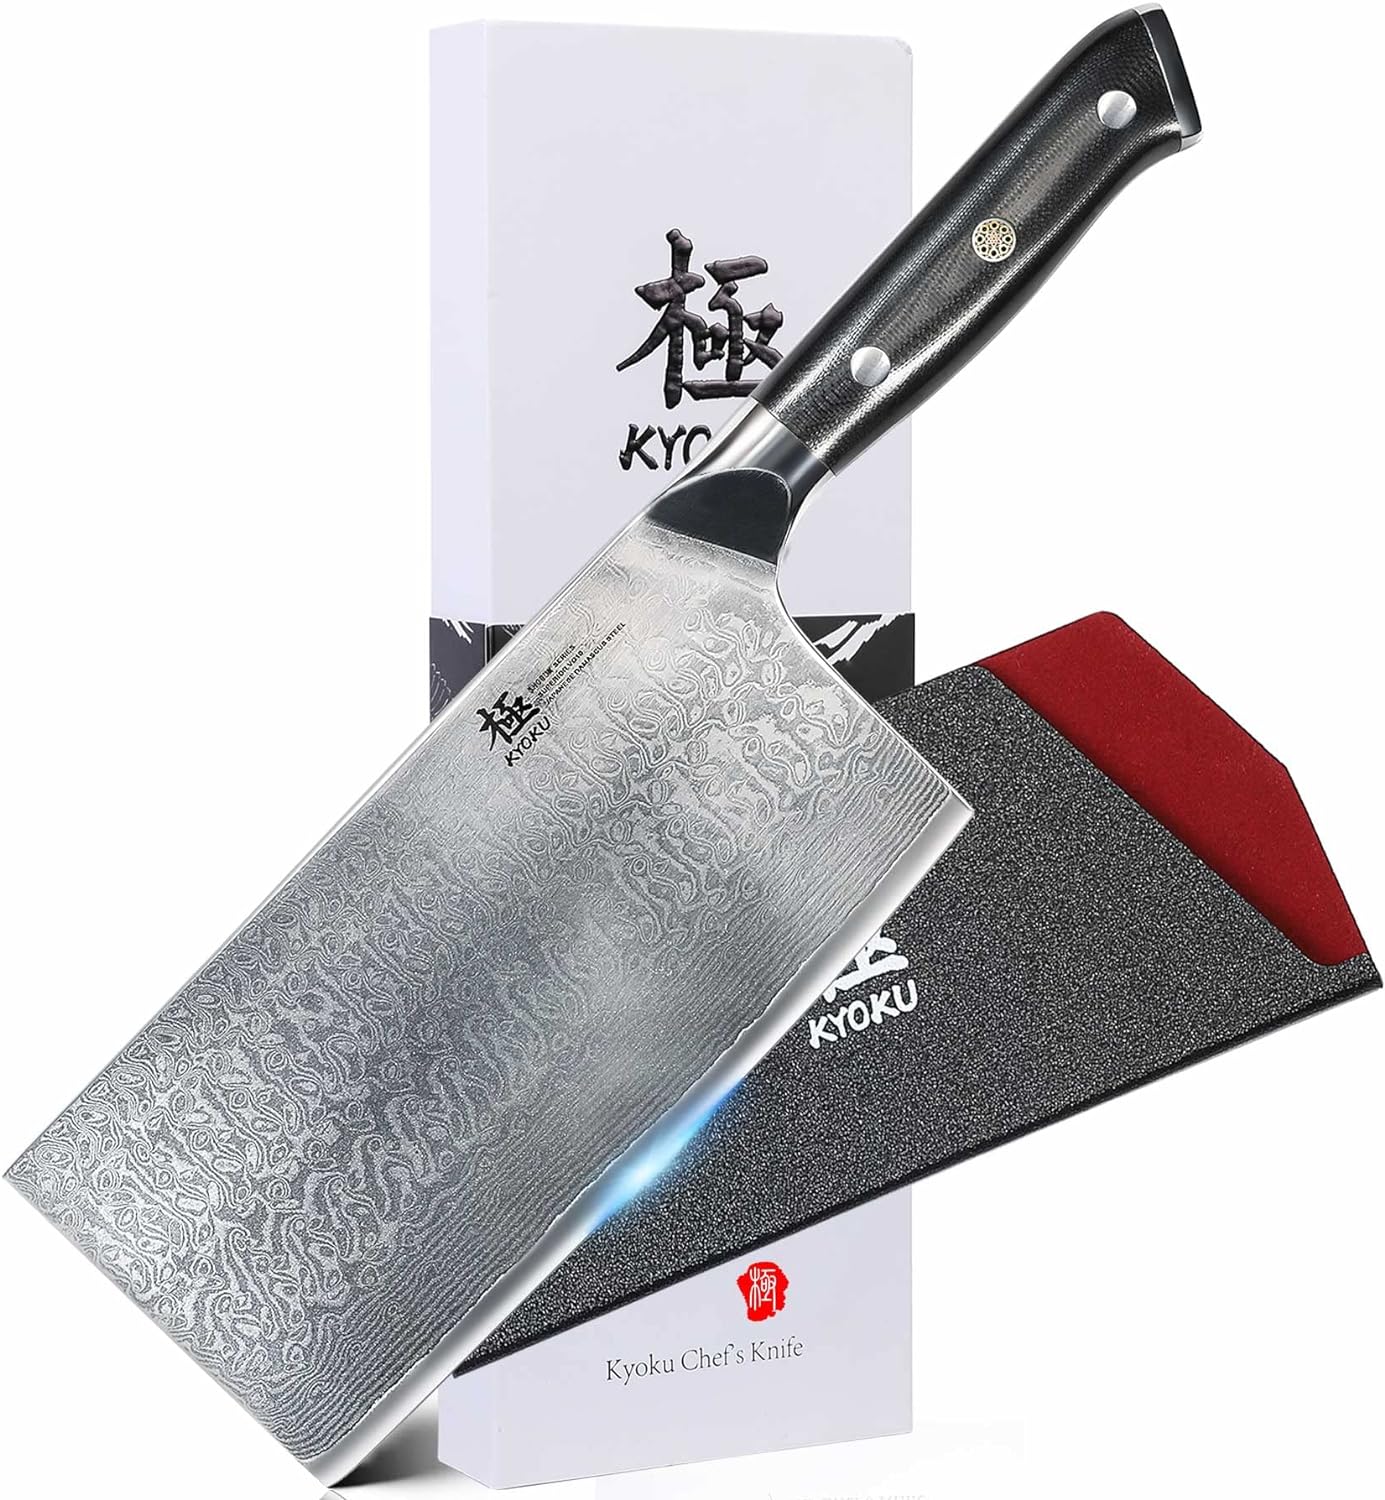 KYOKU Vegetable Cleaver Knife - 7 - Shogun Series - Japanese VG10 Steel Core Forged Damascus Blade - with Sheath  Case